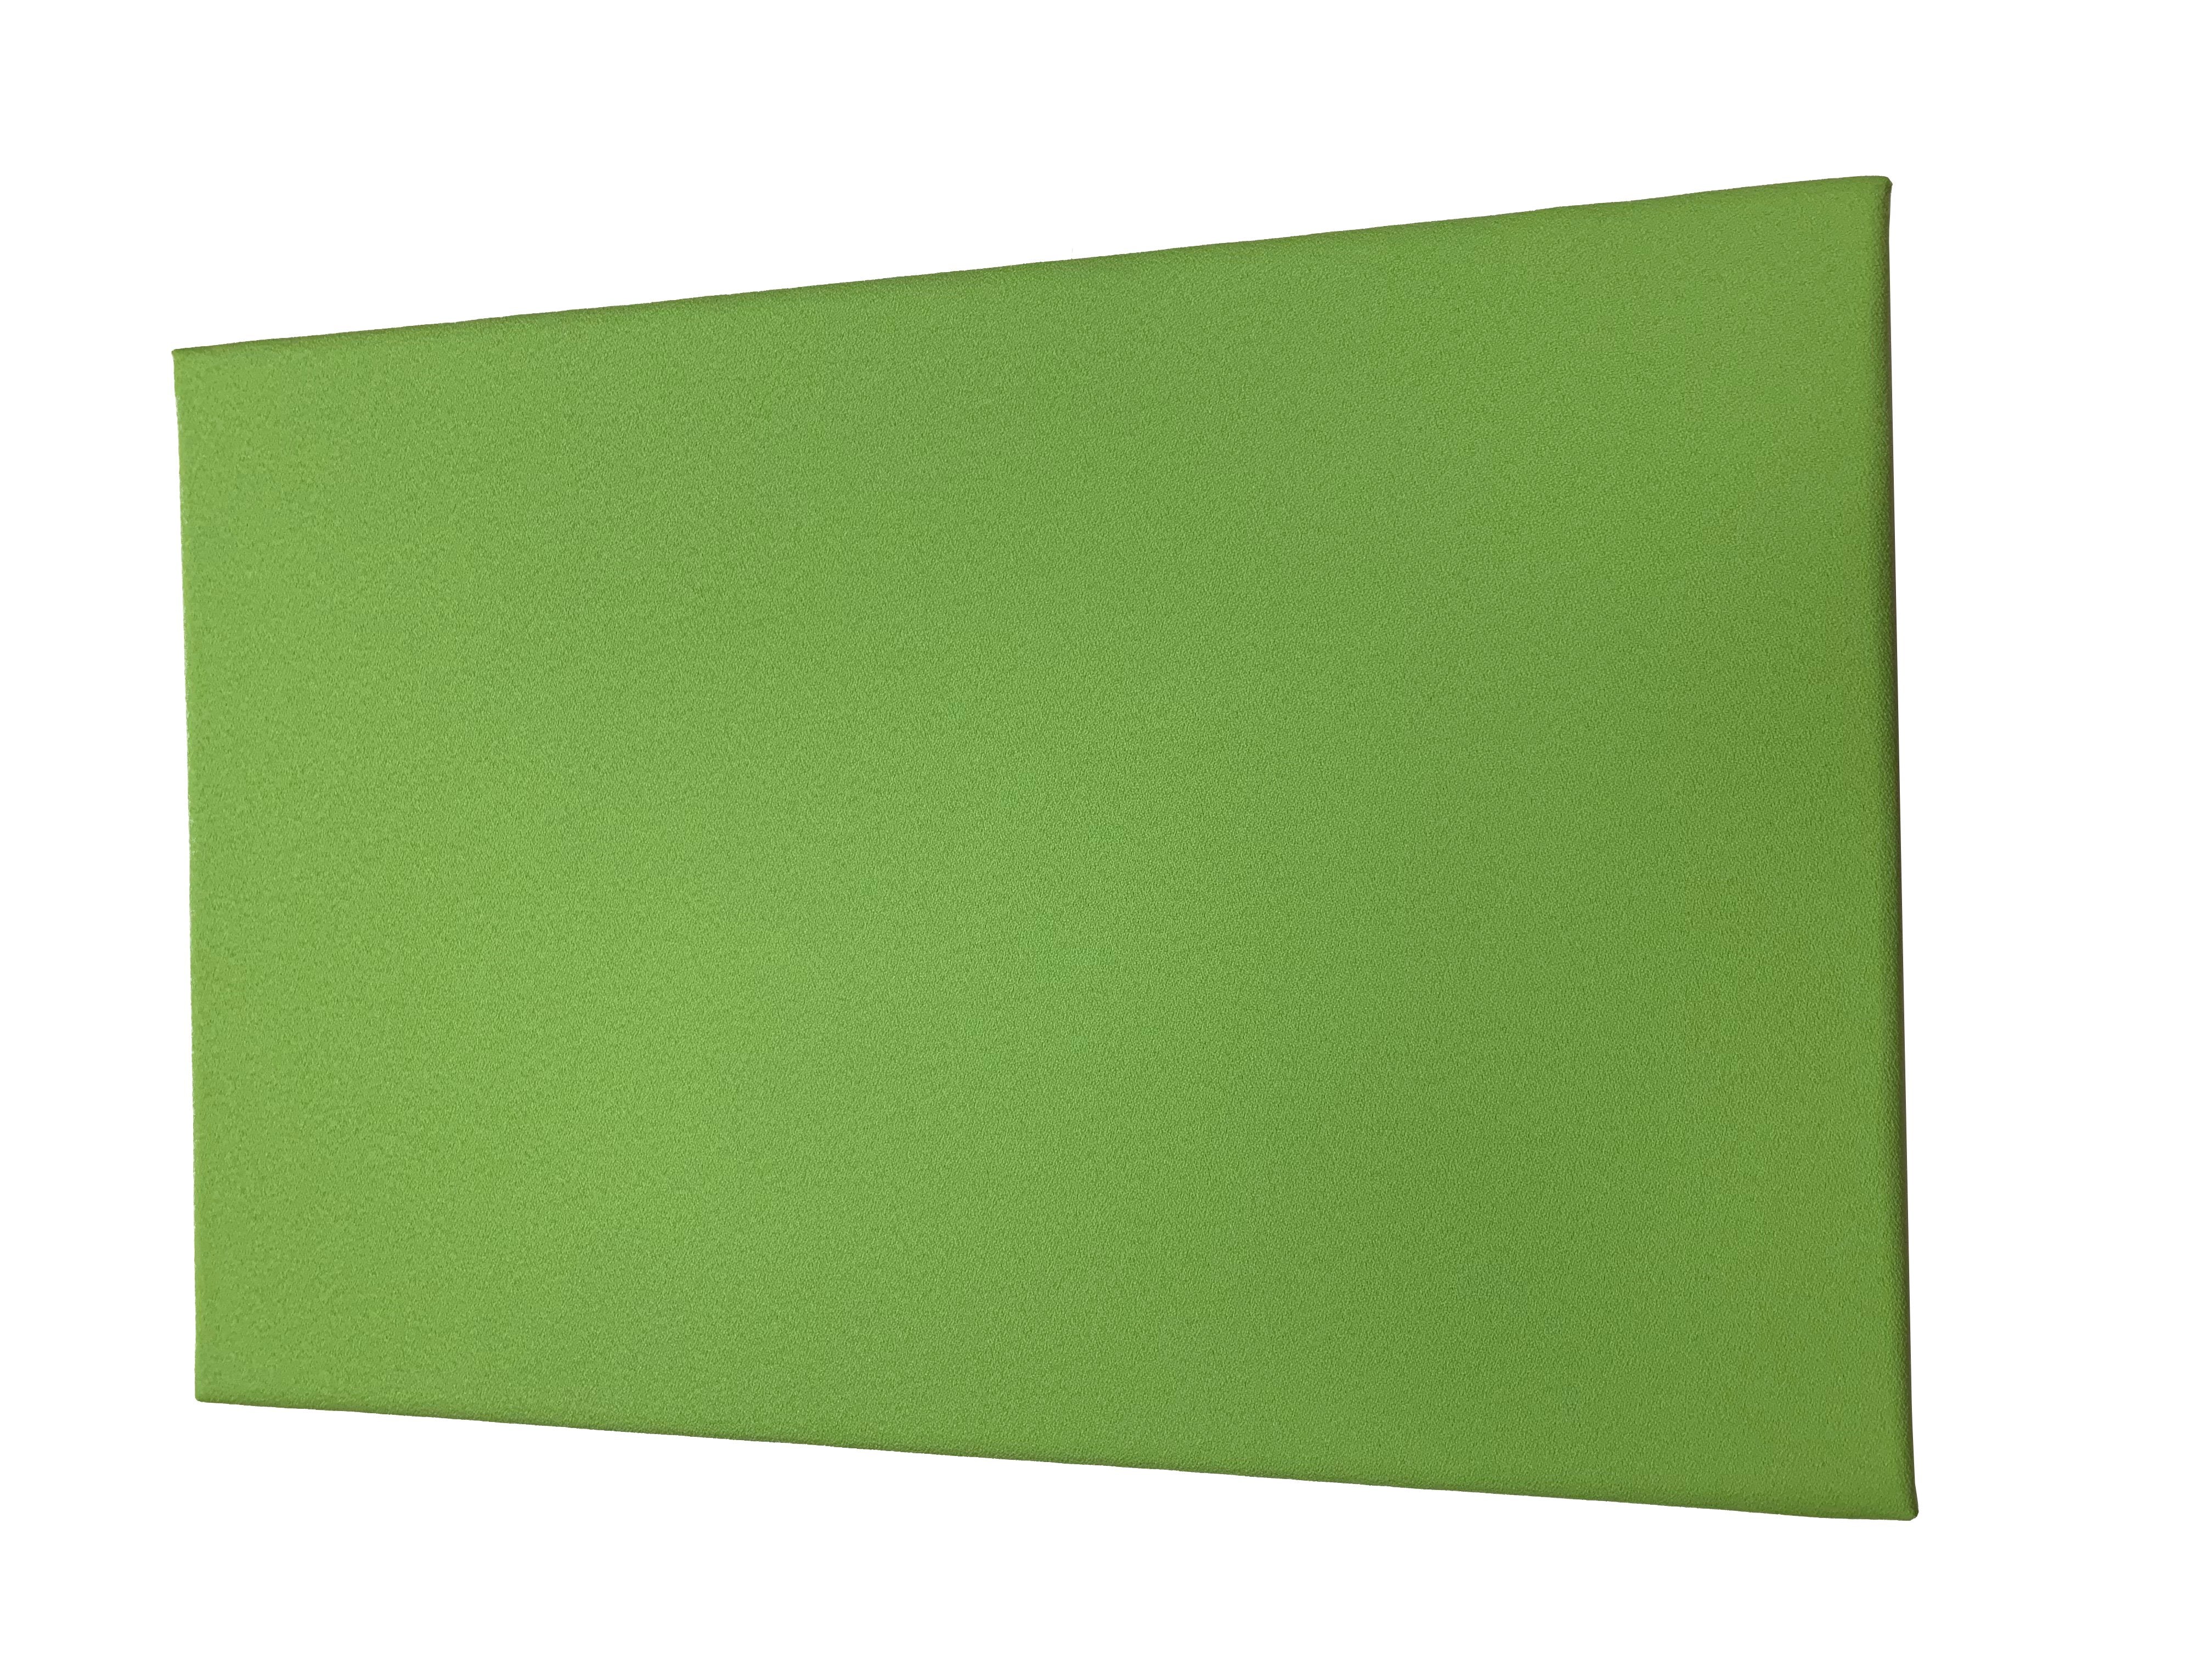 1" SoundControl Ceiling Mounted Acoustic Panel 2ft by 3ft - Advanced Acoustics